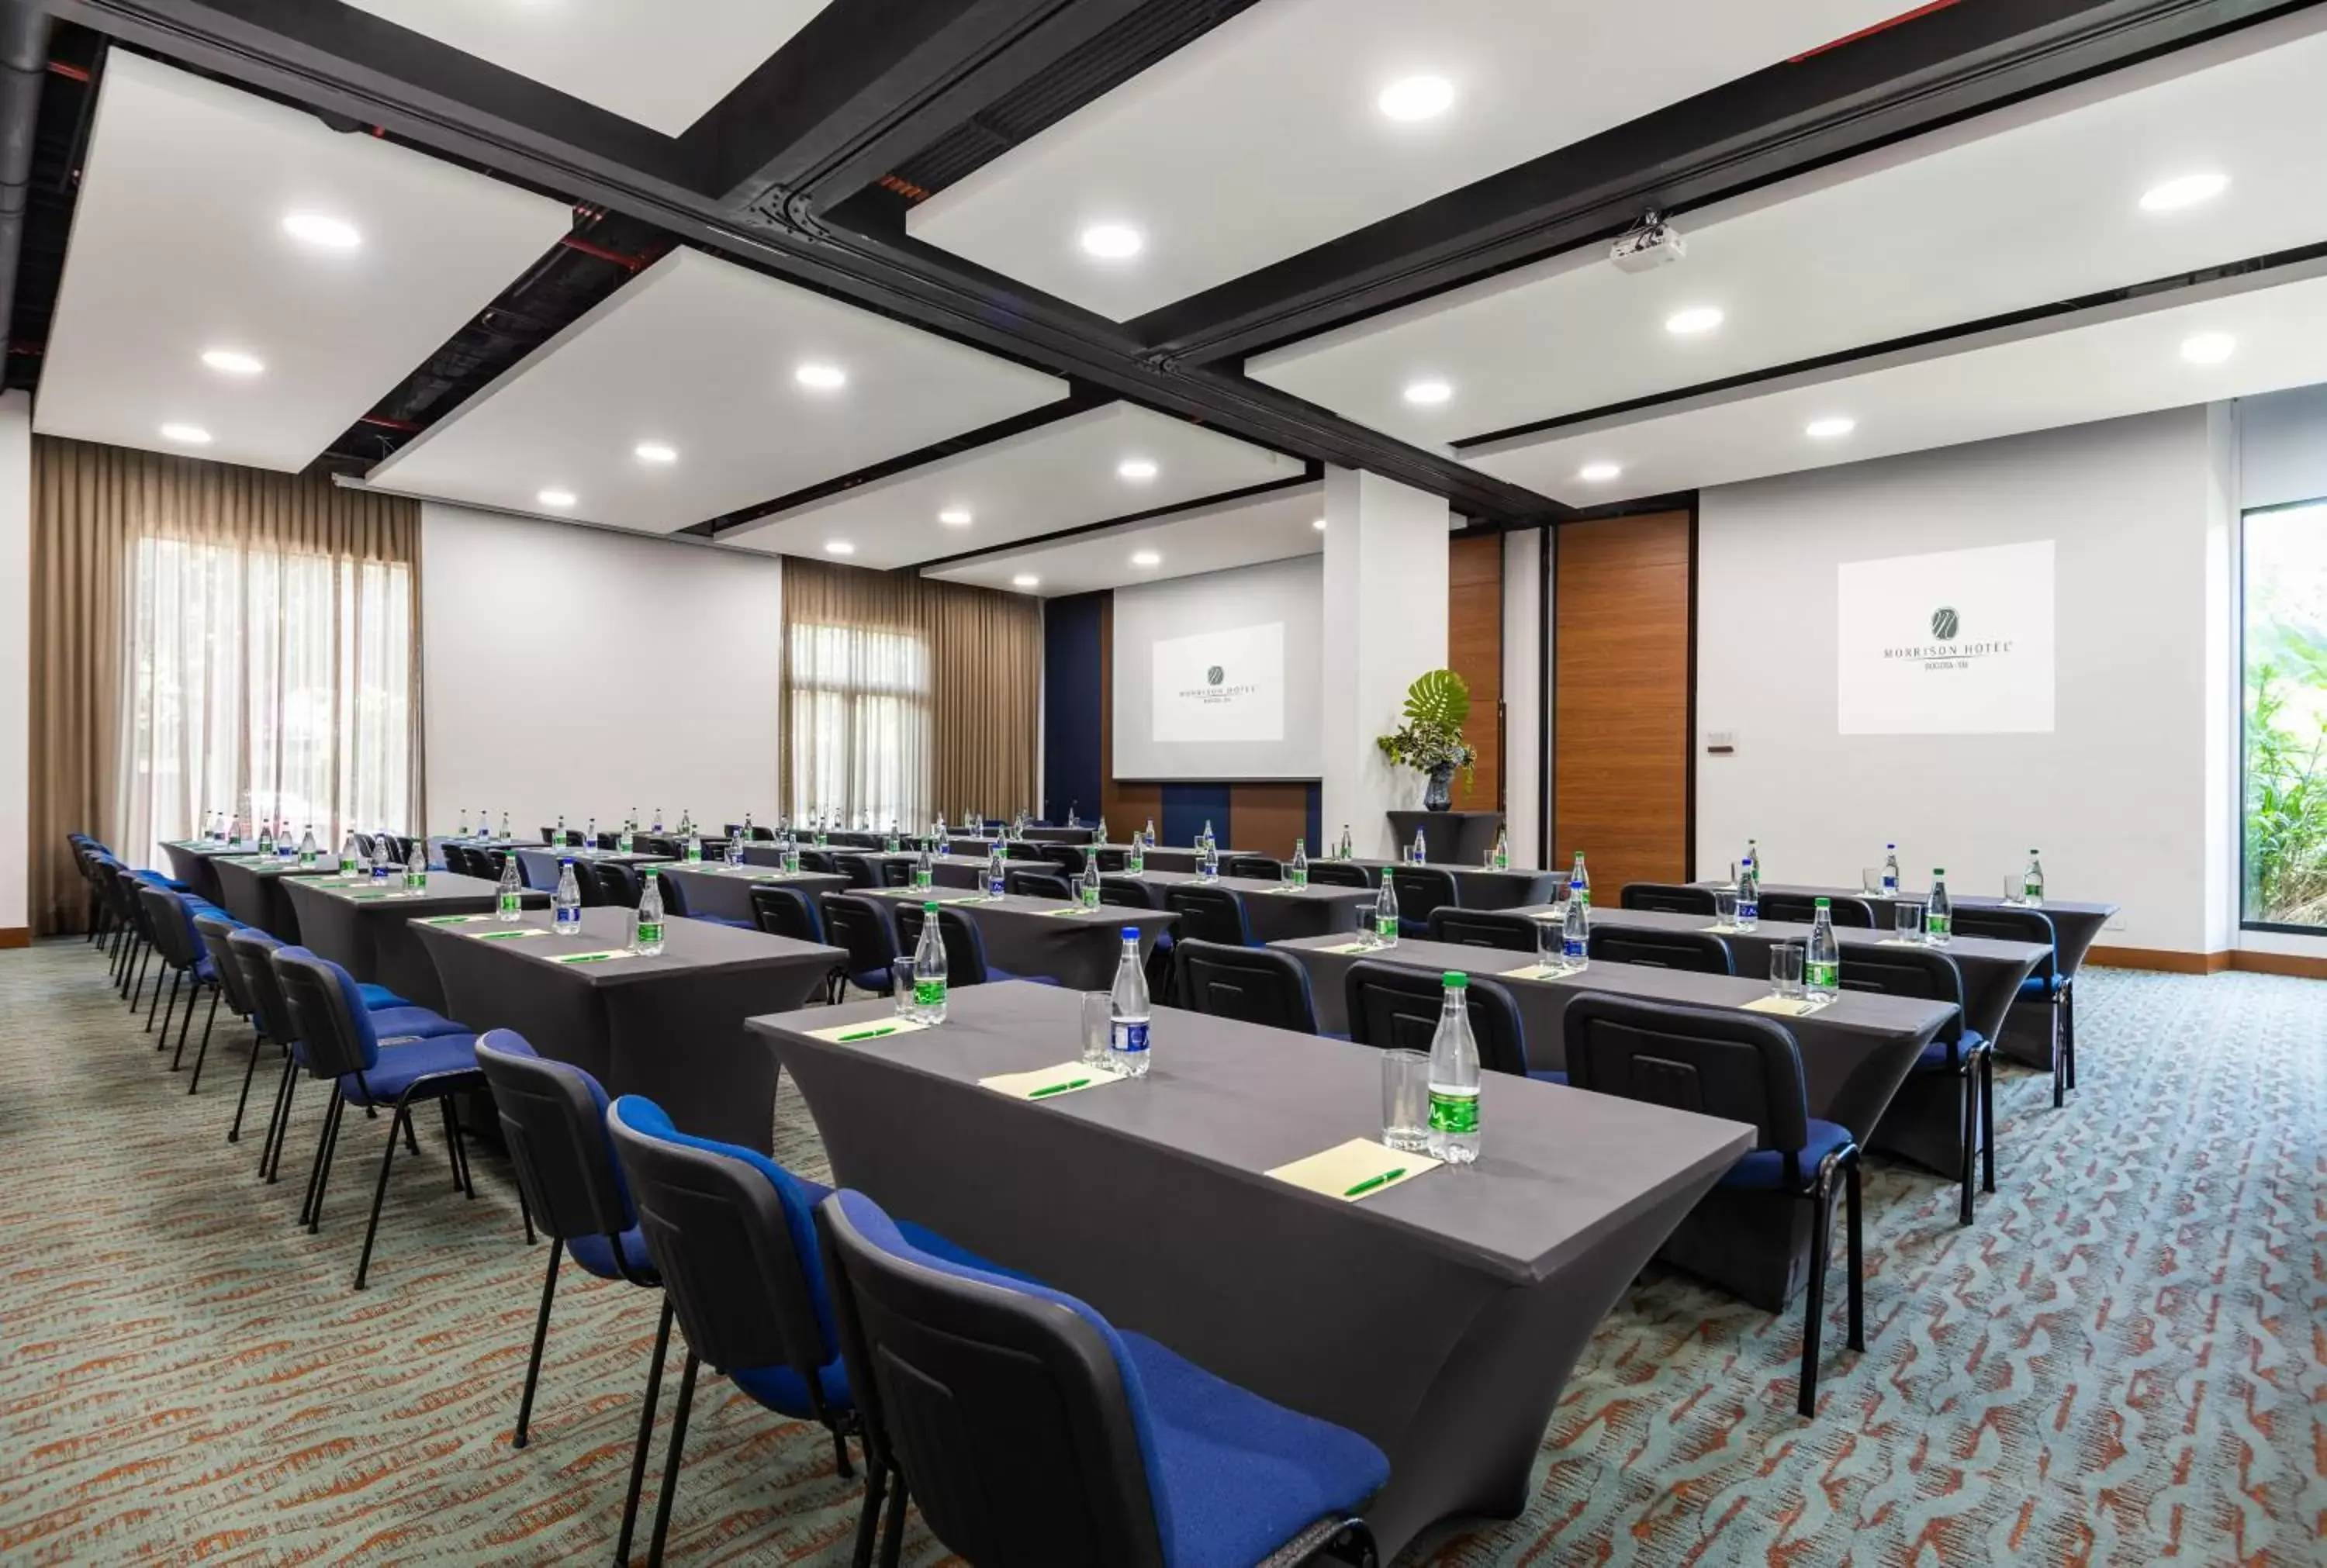 Meeting/conference room in Hotel Morrison 114